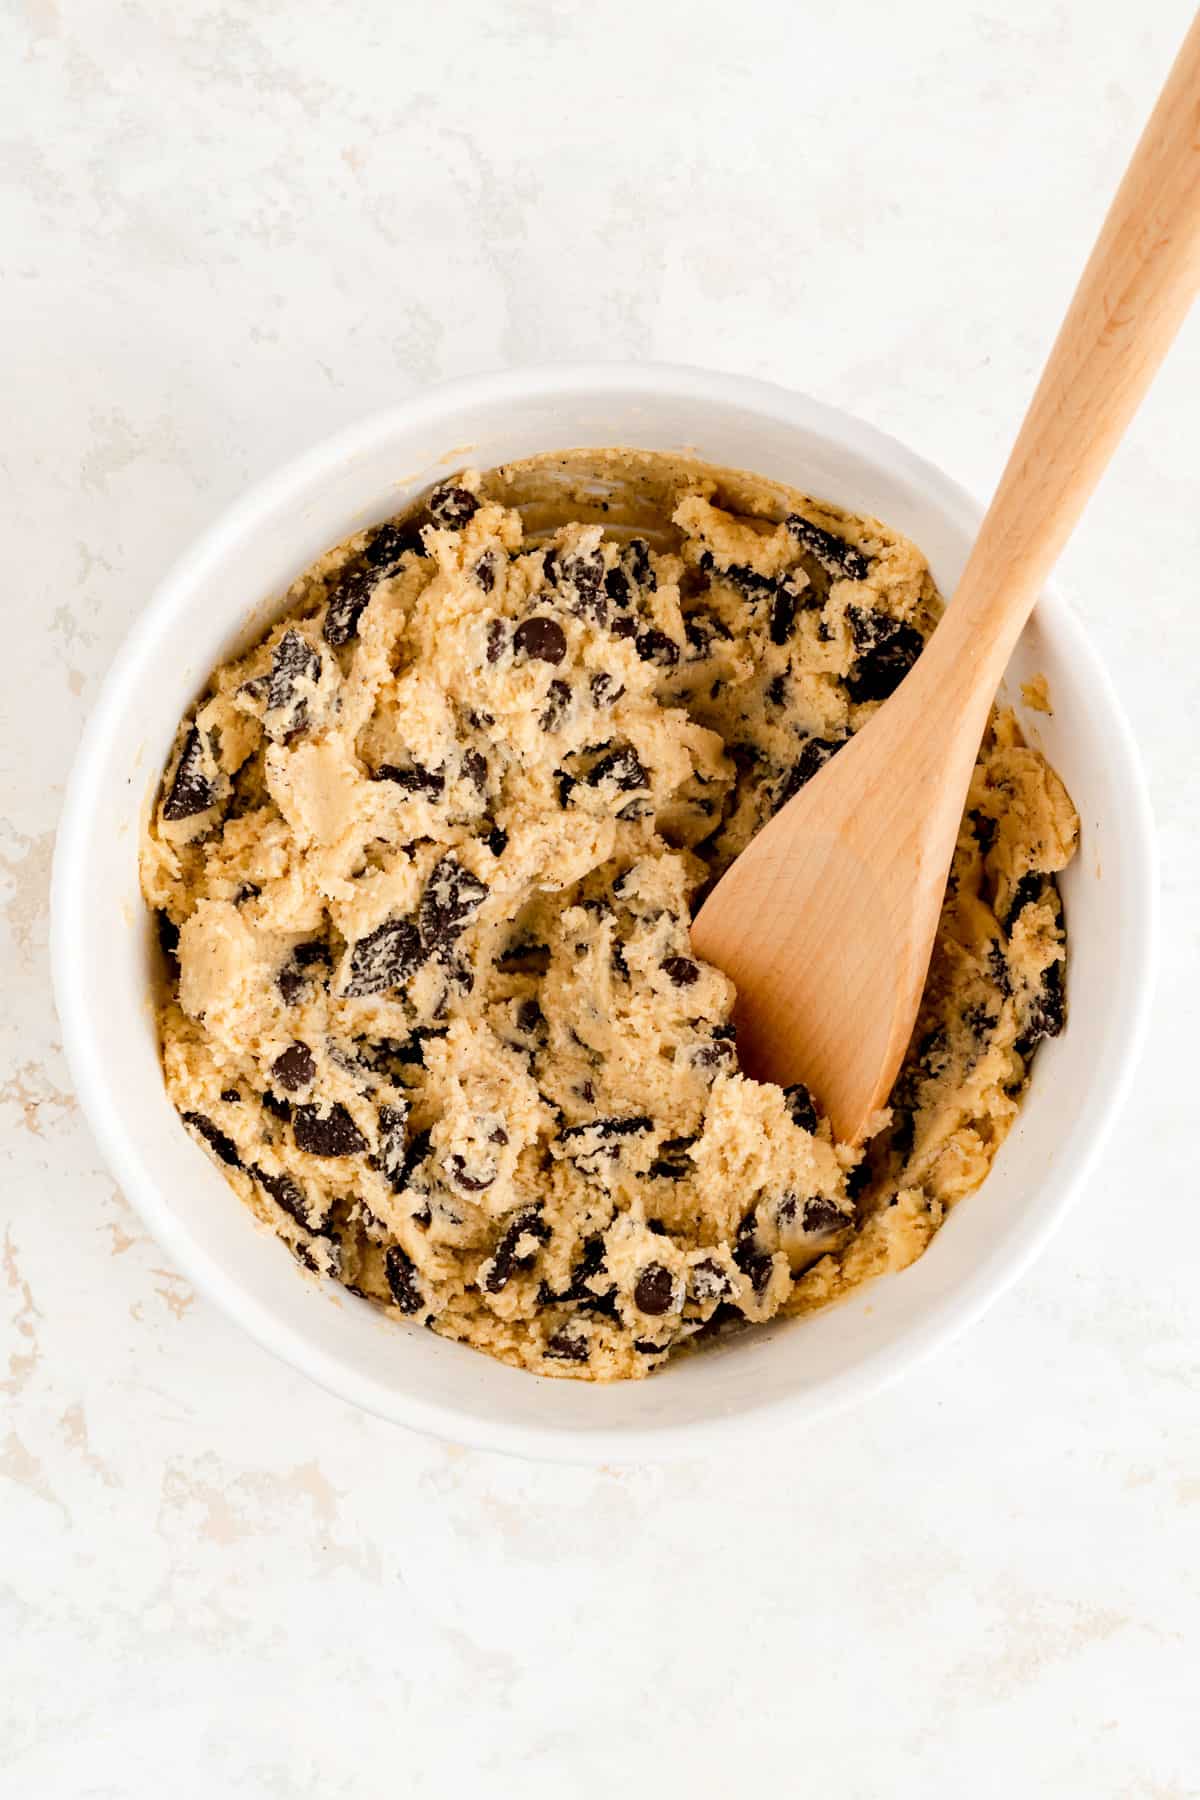 fully mixed oreos chocolate chip cookie dough in a white bowl with a wooden spoon in it.